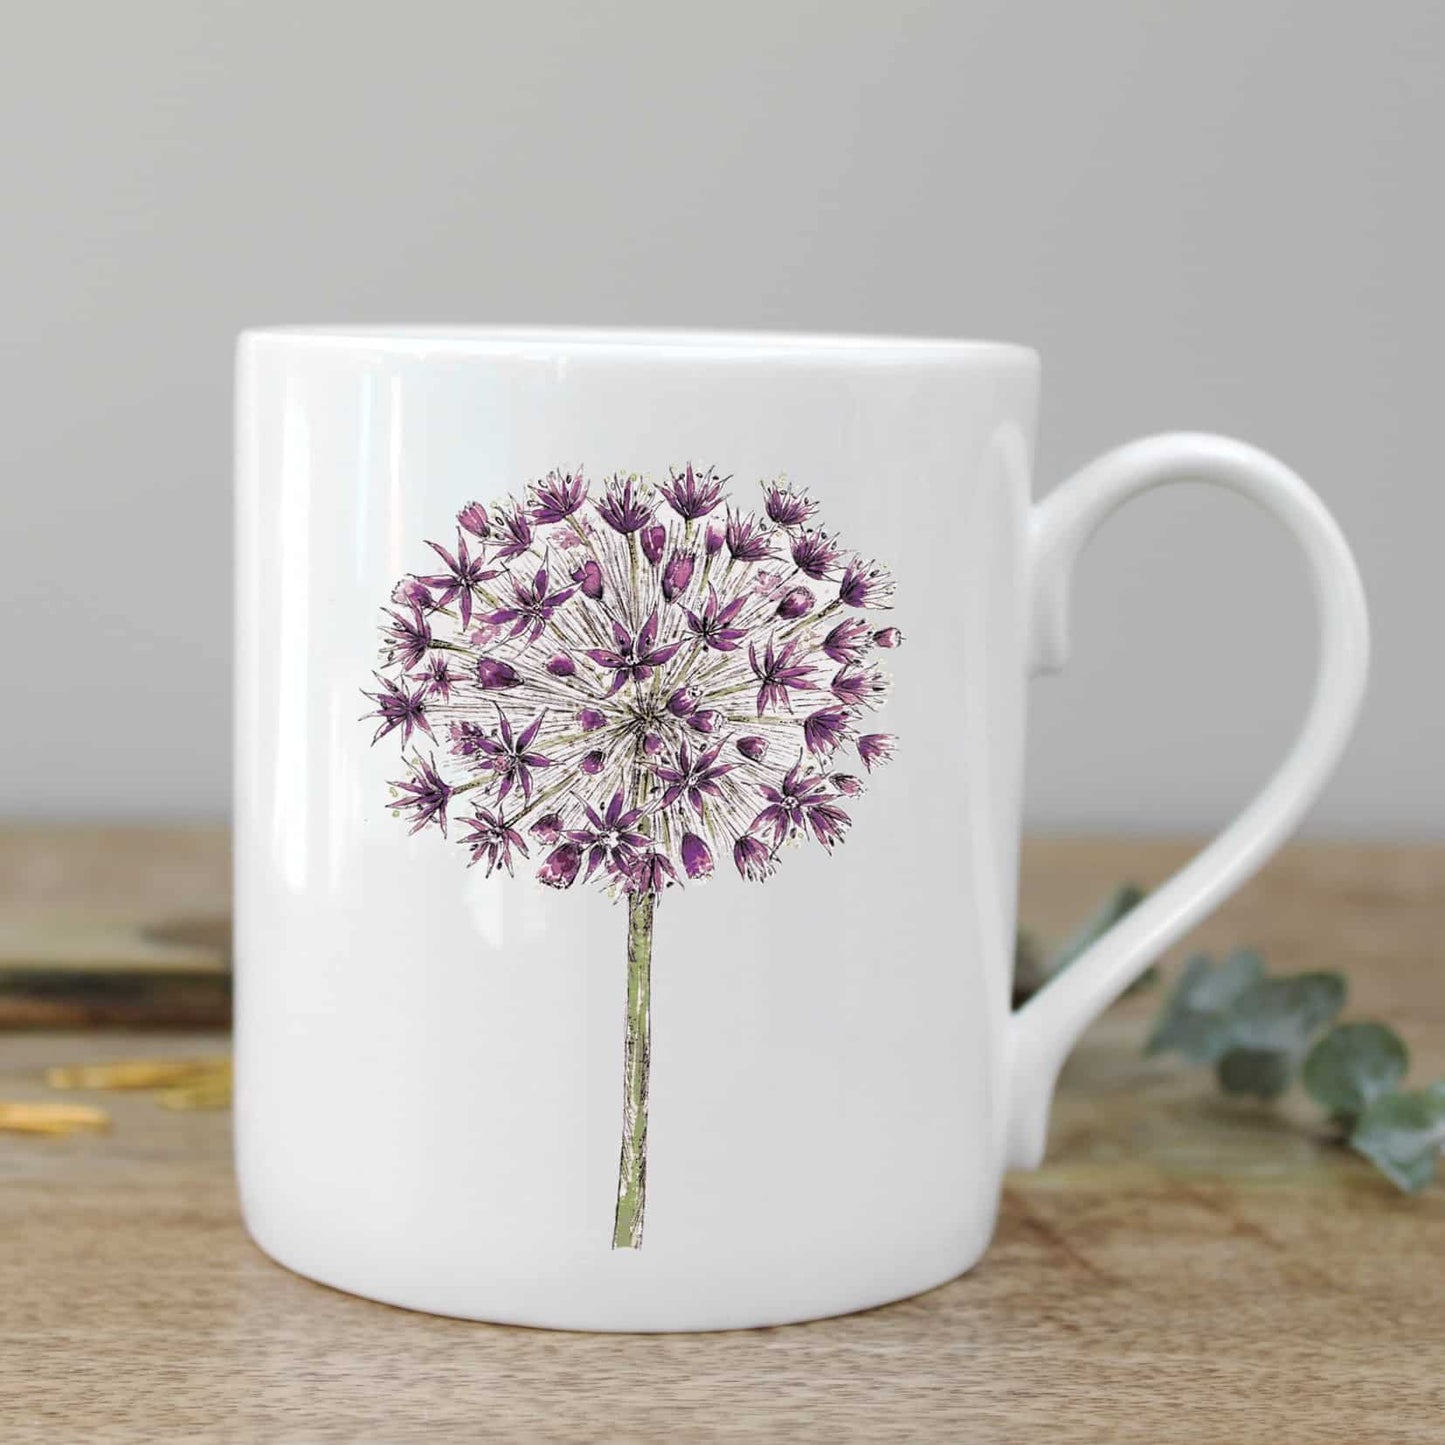 Mug with an illustration of an allium flower. Photographed on a wooden surface. 